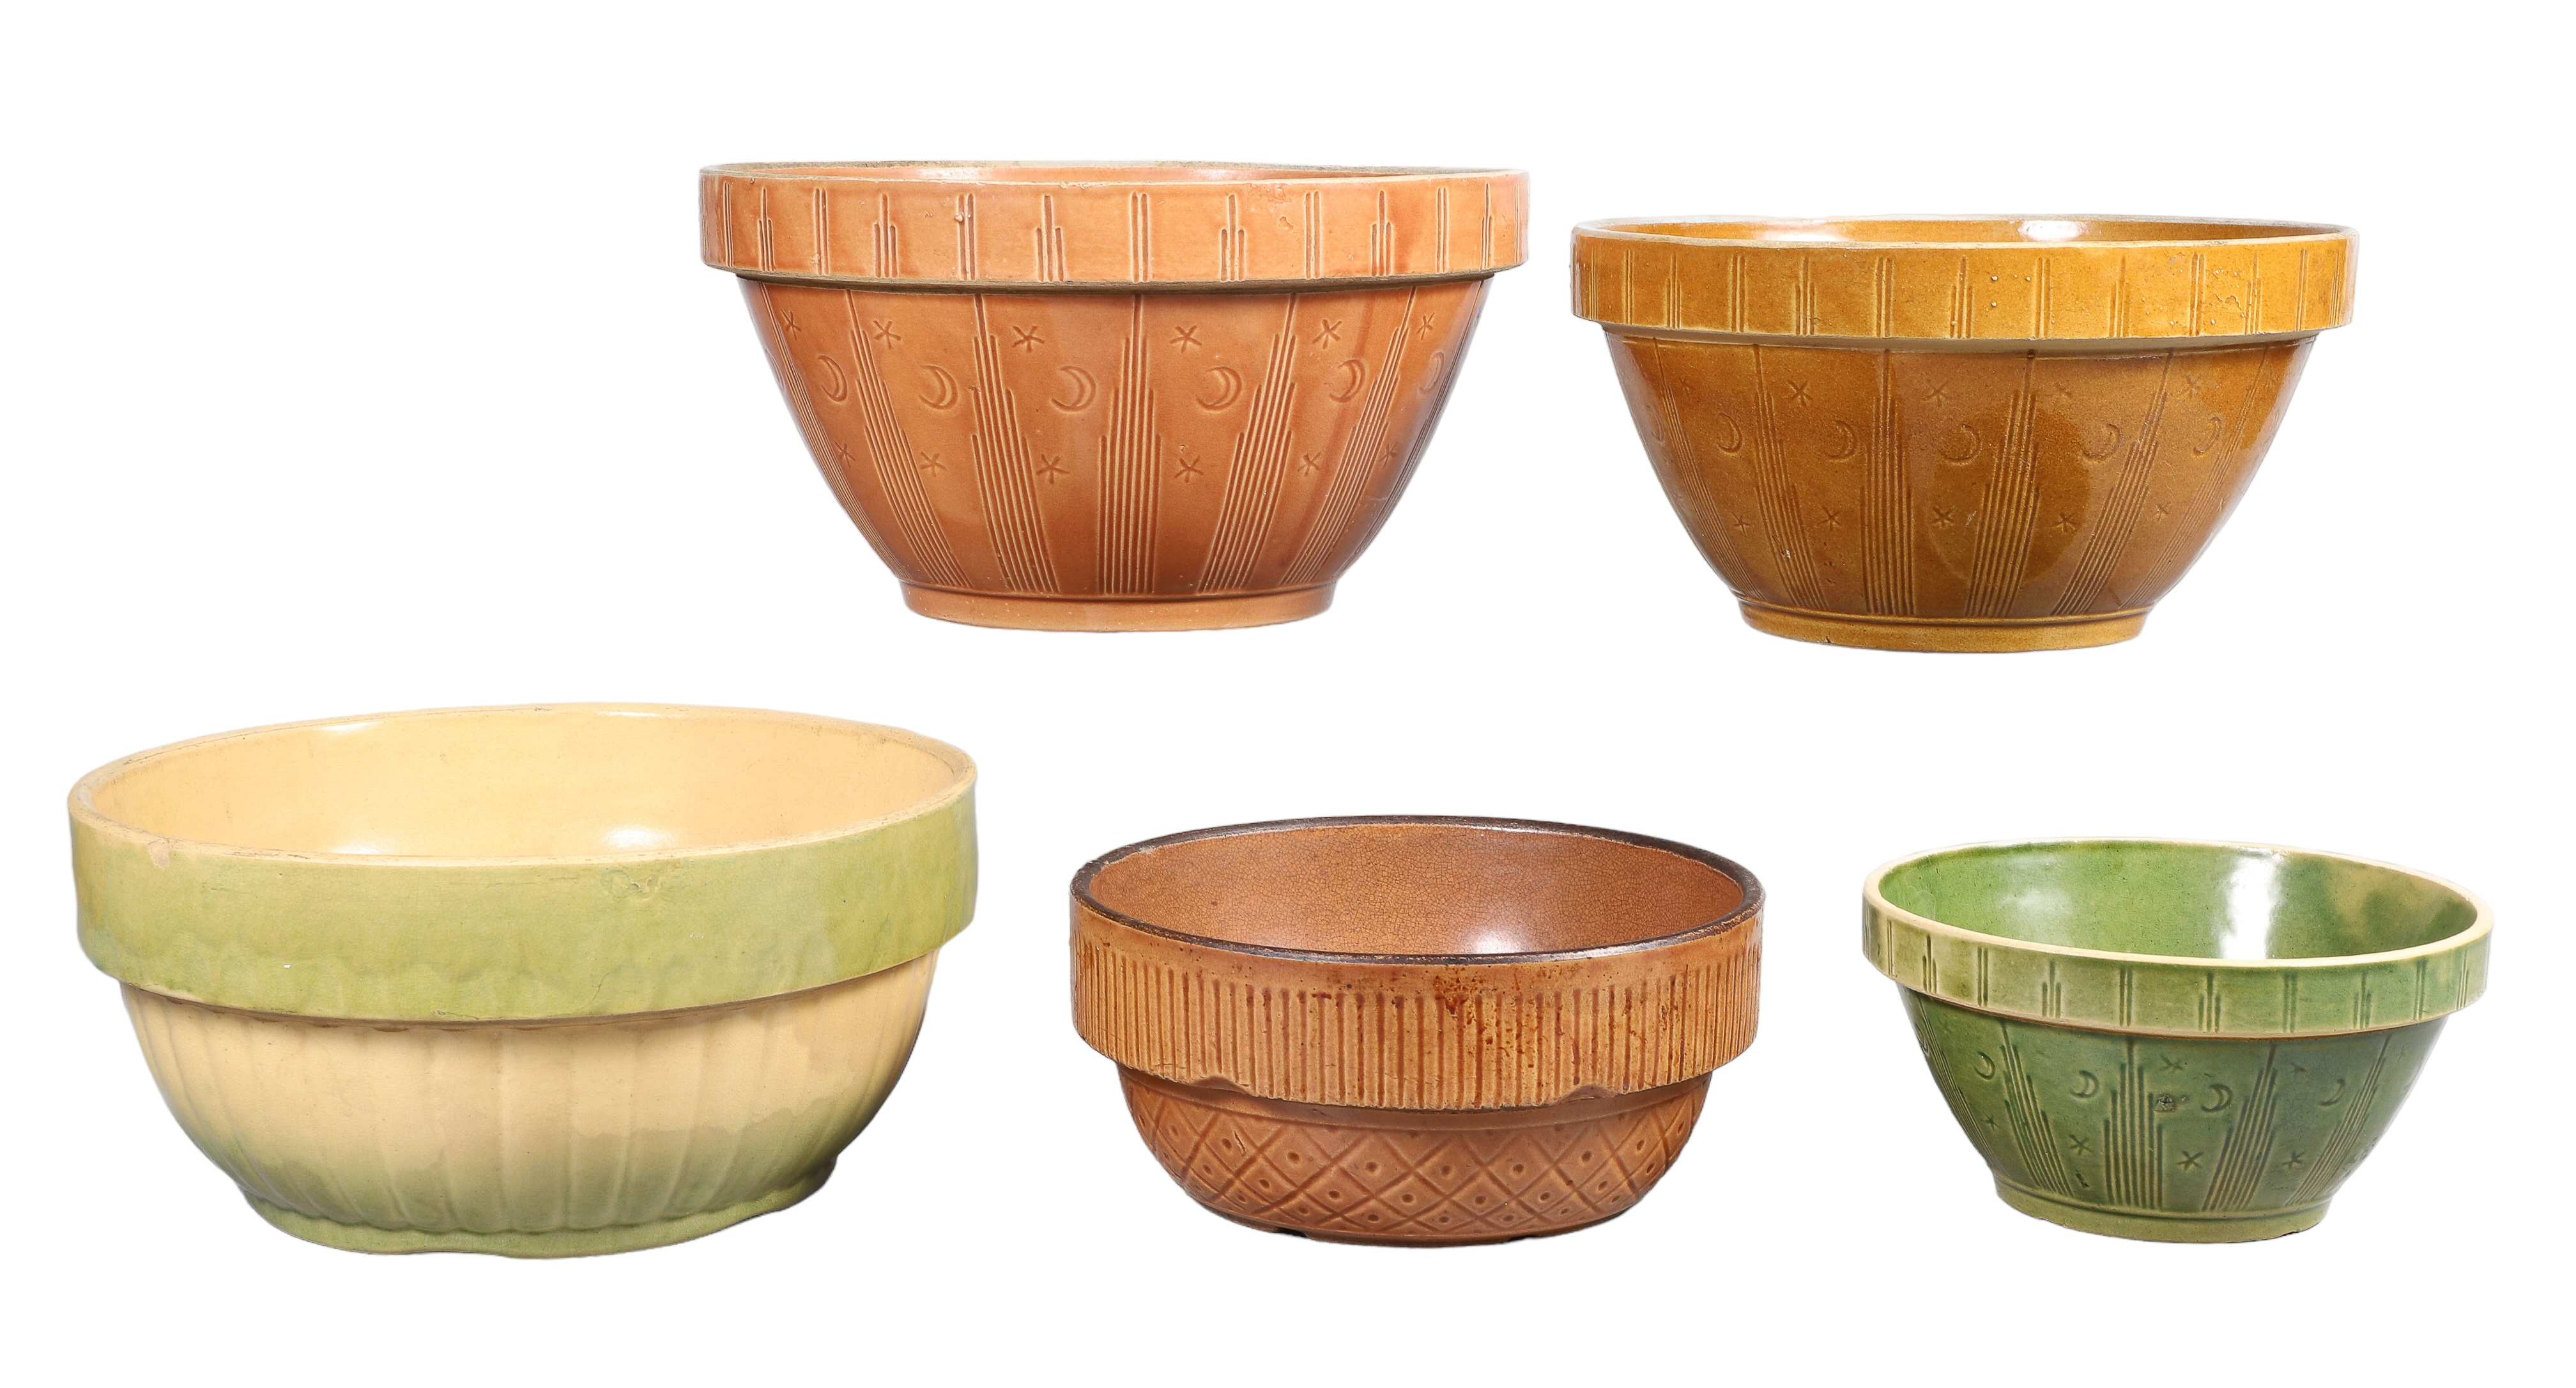  5 Pottery mixing bowls to include 2e1aae